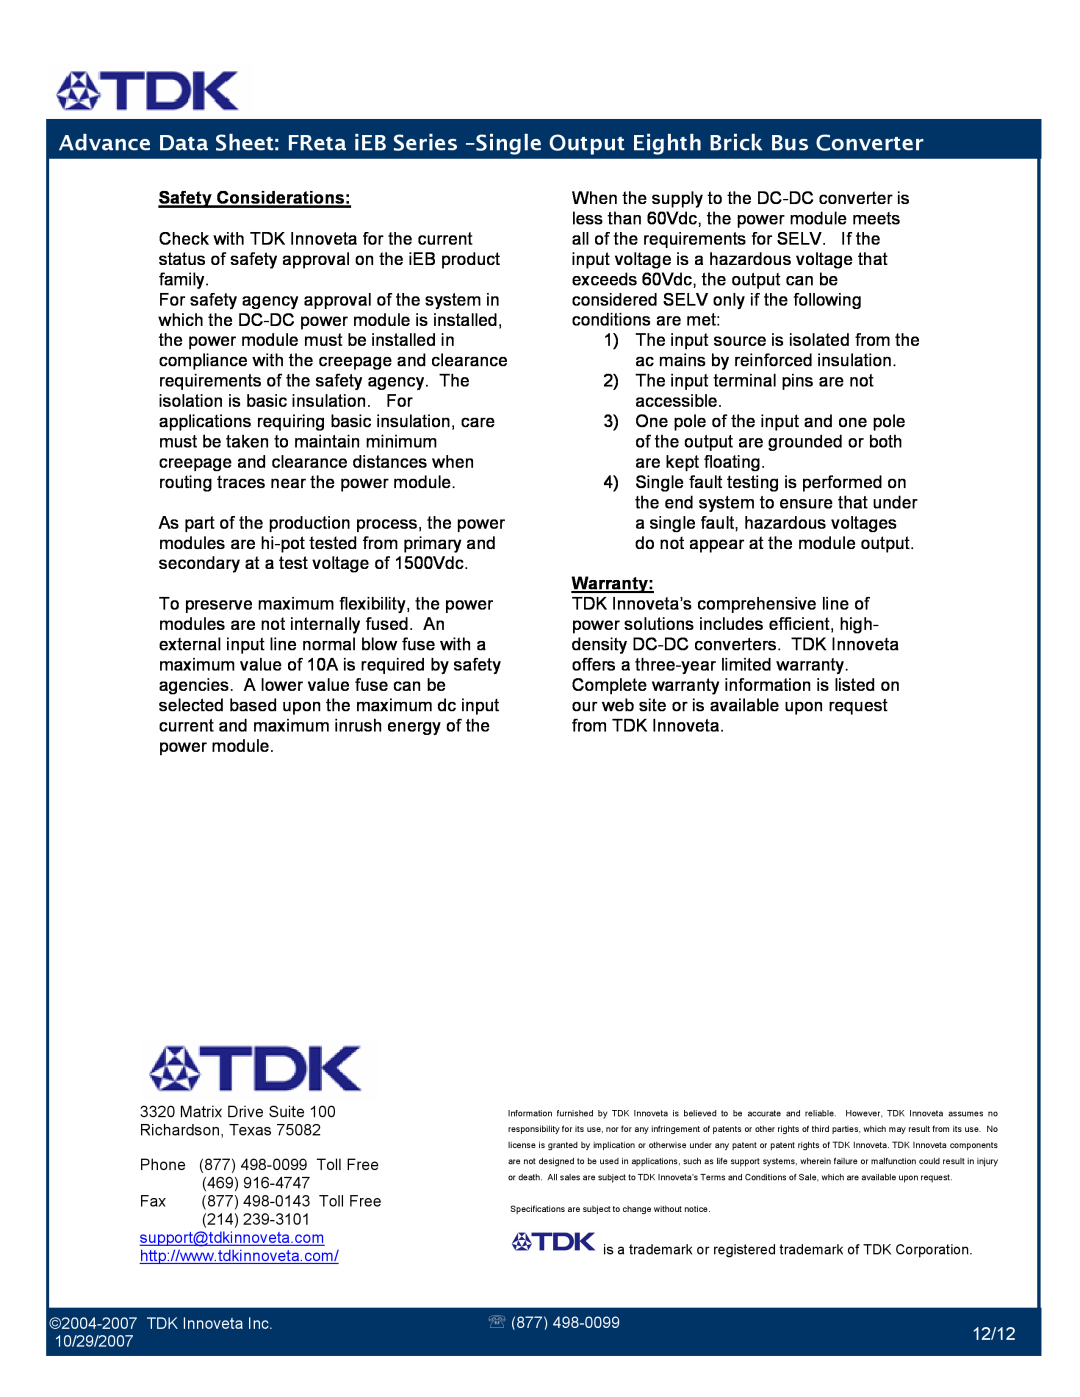 TDK iEB Series manual 12/12, Safety Considerations 